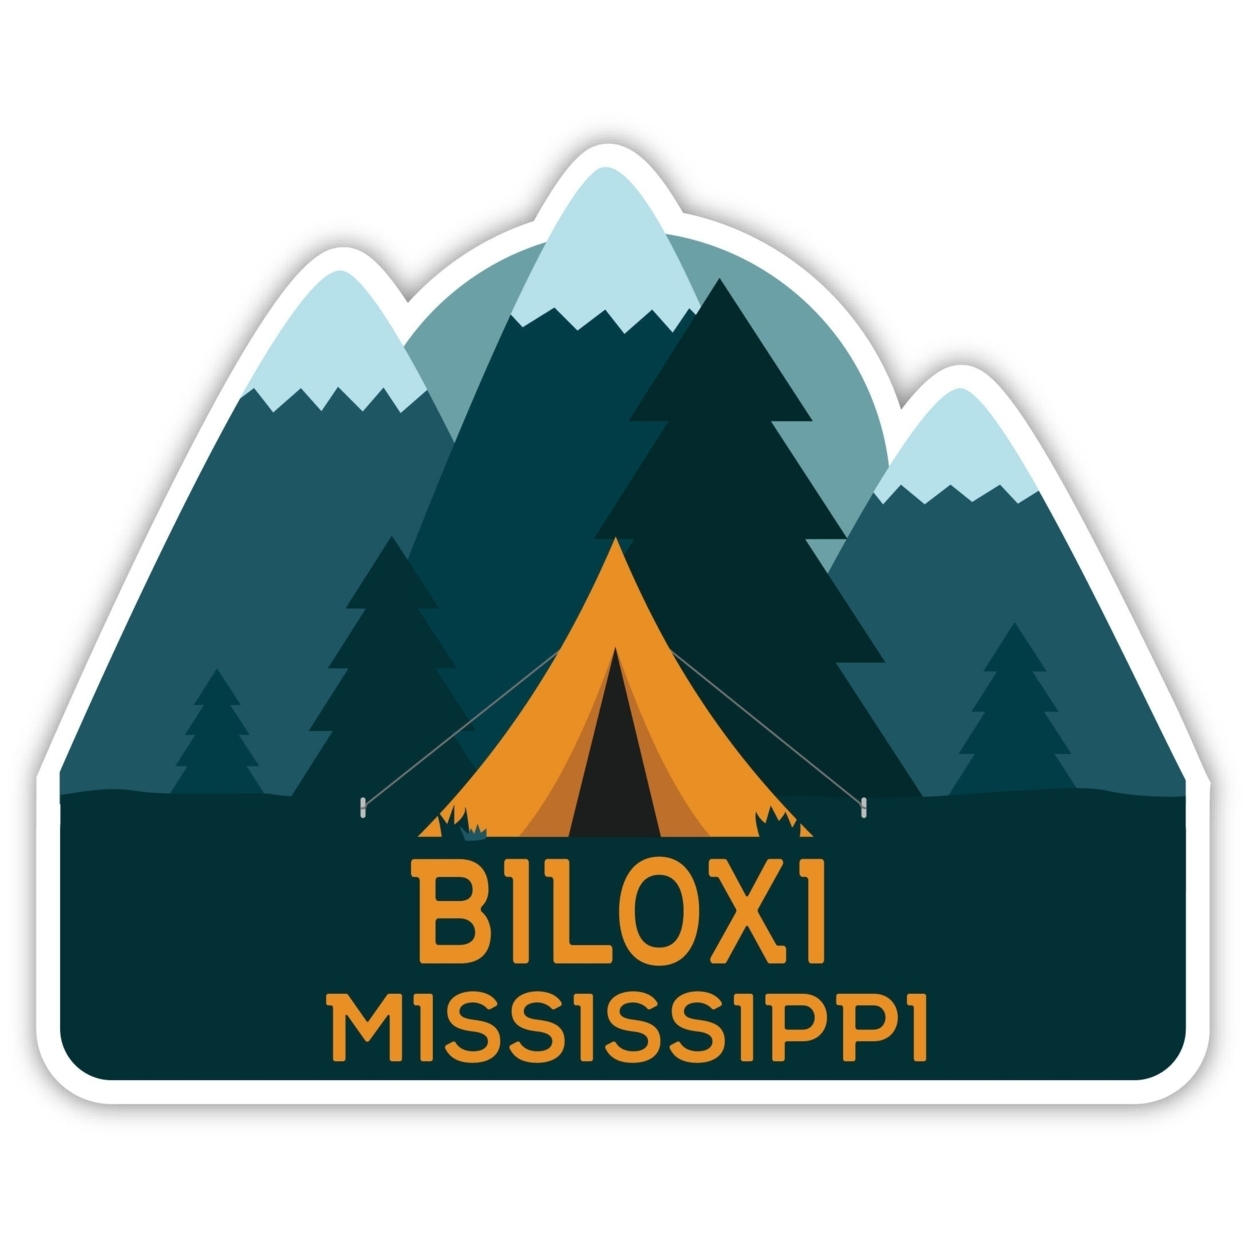 Biloxi Mississippi Souvenir Decorative Stickers (Choose Theme And Size) - 4-Pack, 12-Inch, Bear